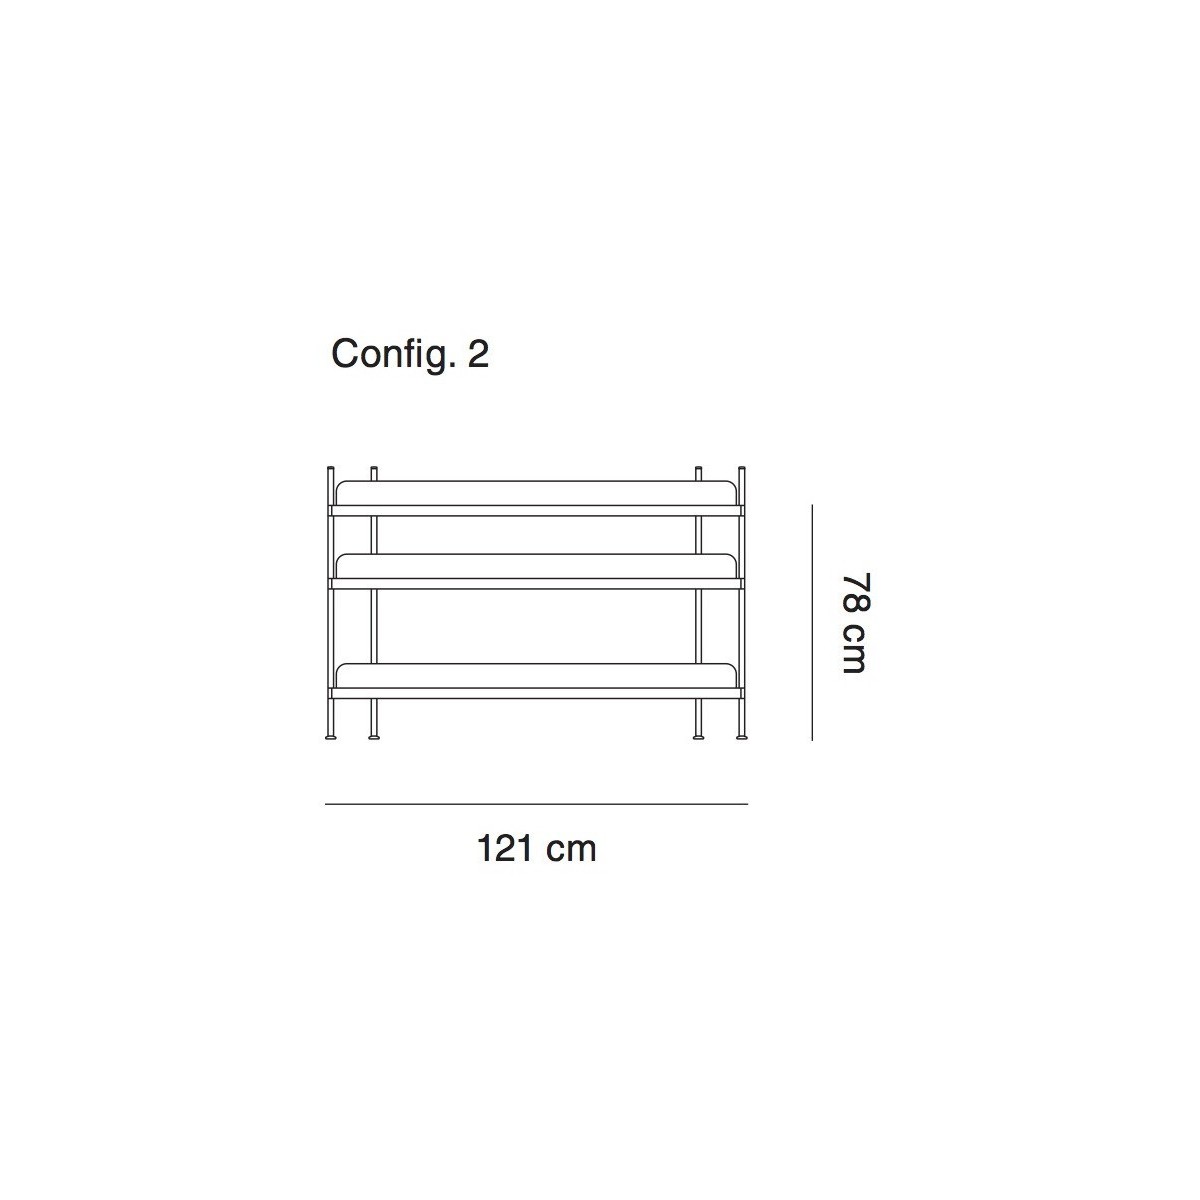 configuration 2 - Compile shelving system